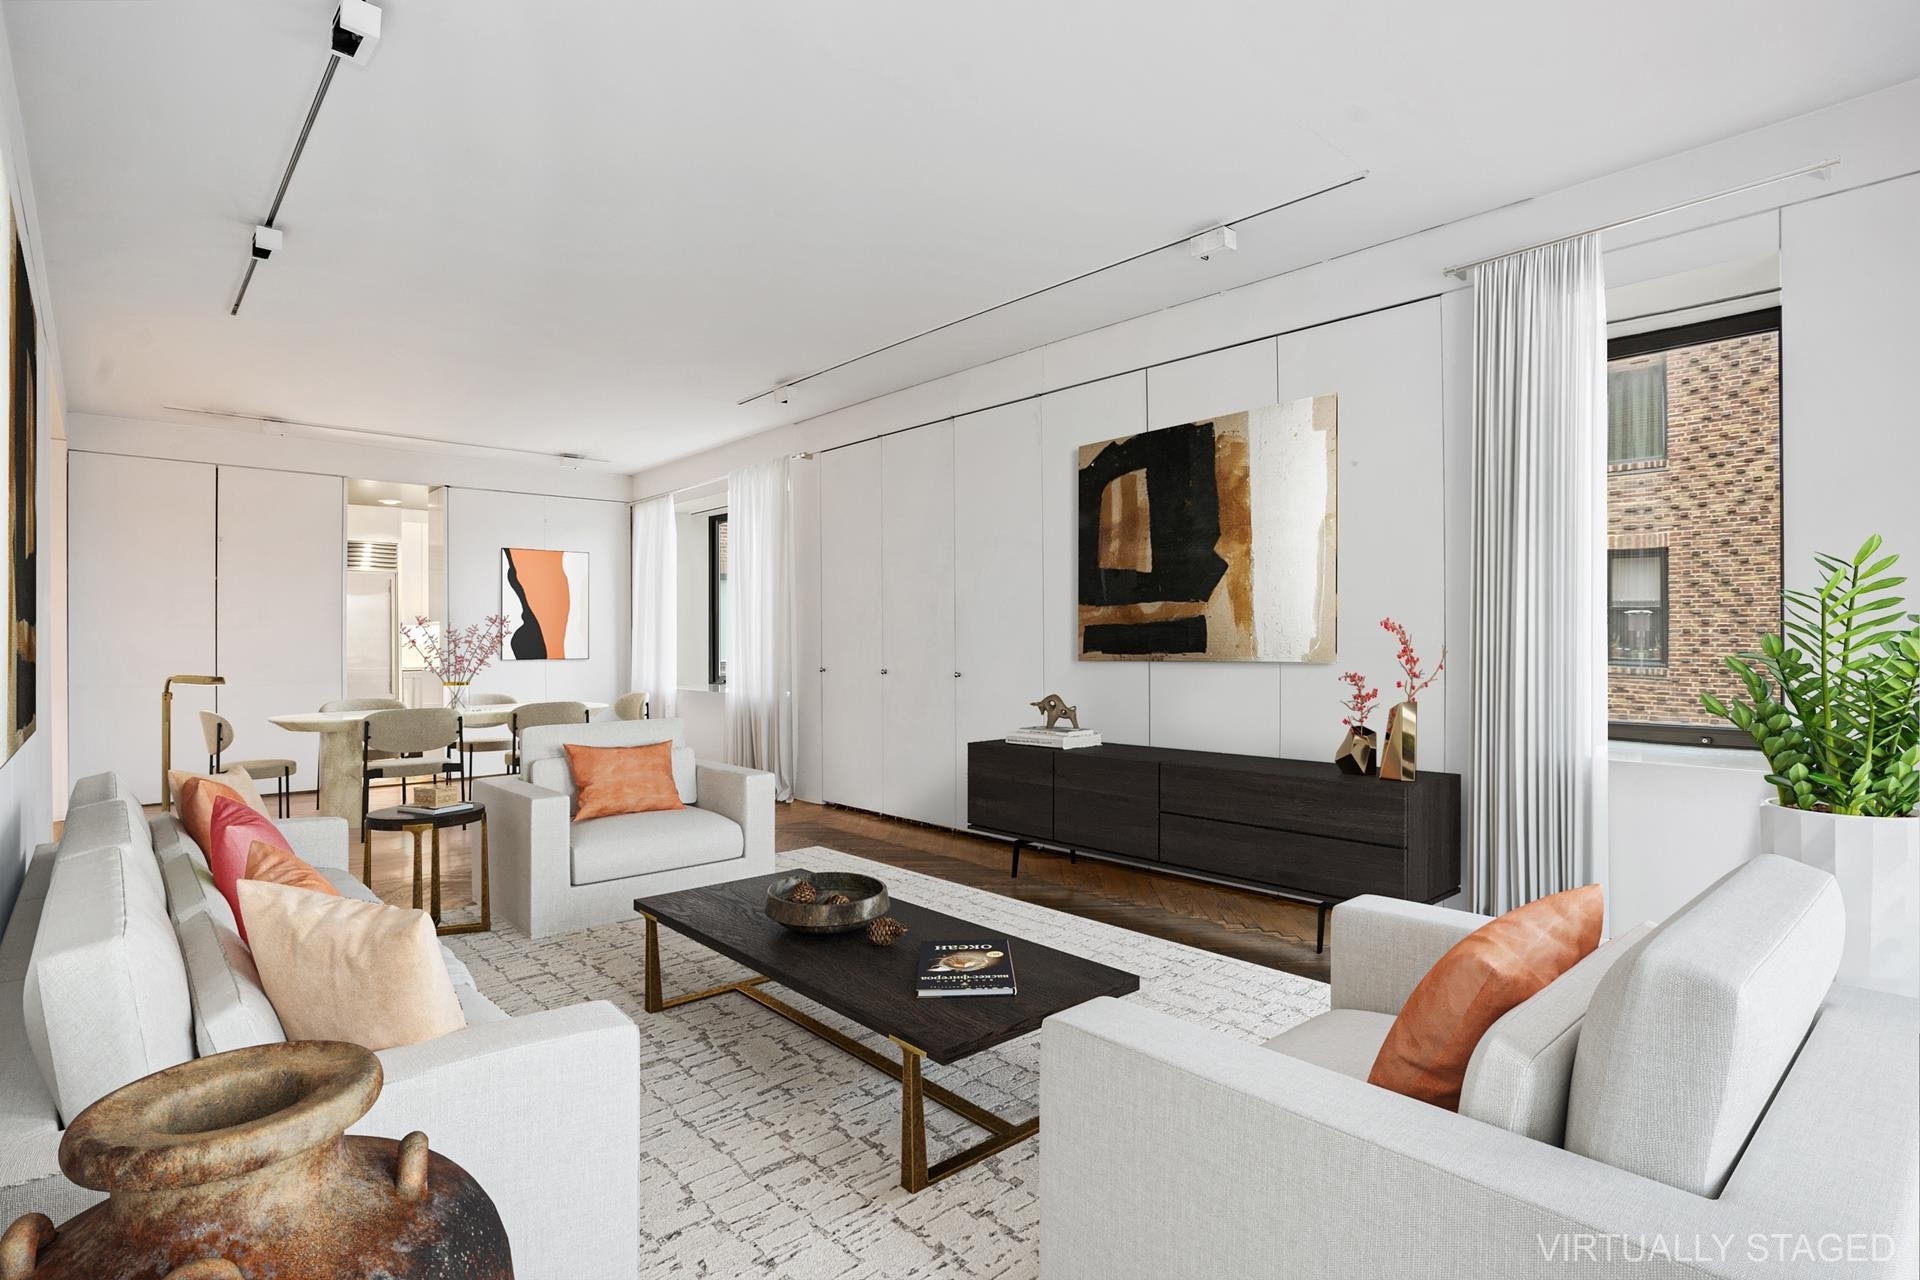 Co-op Properties for Sale at Beekman Terrace, 455 E 51ST ST, 3F Beekman, New York, NY 10022